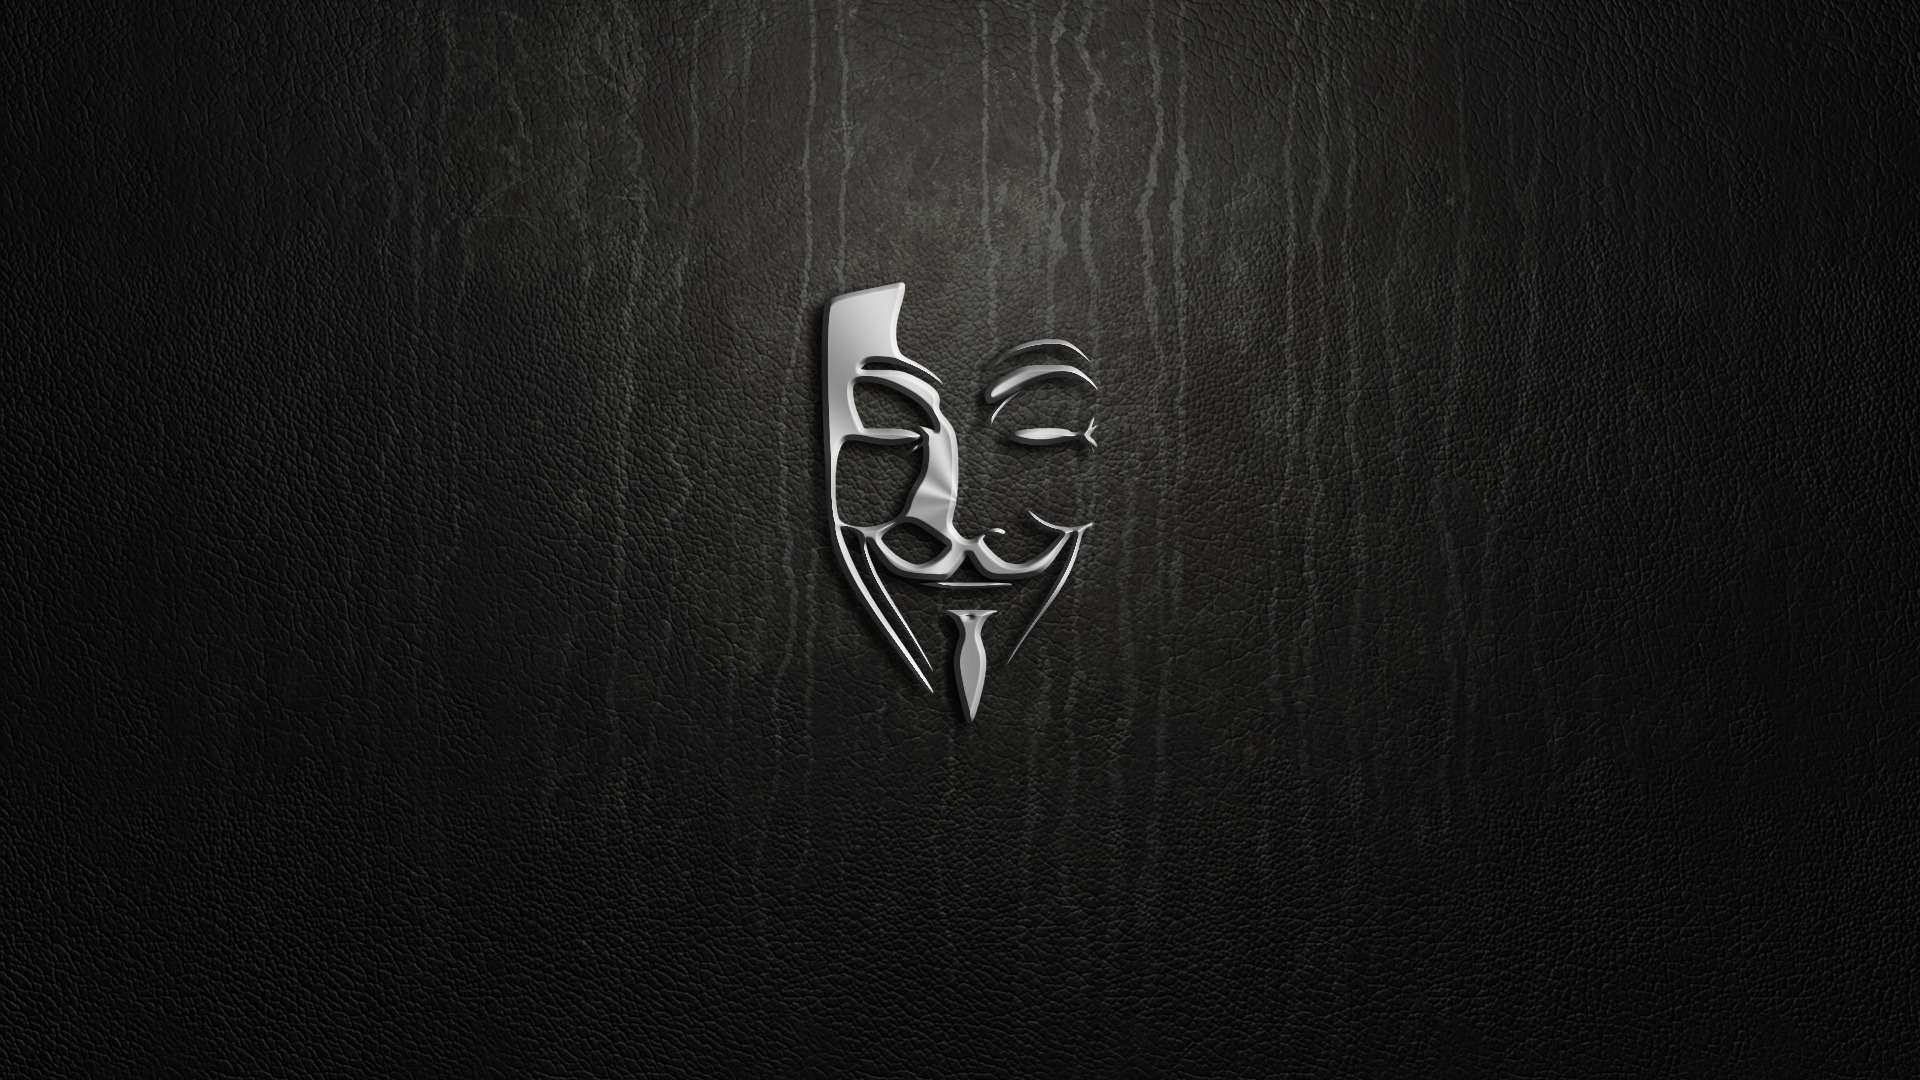 General 1920x1080 hacking hackers Guy Fawkes mask